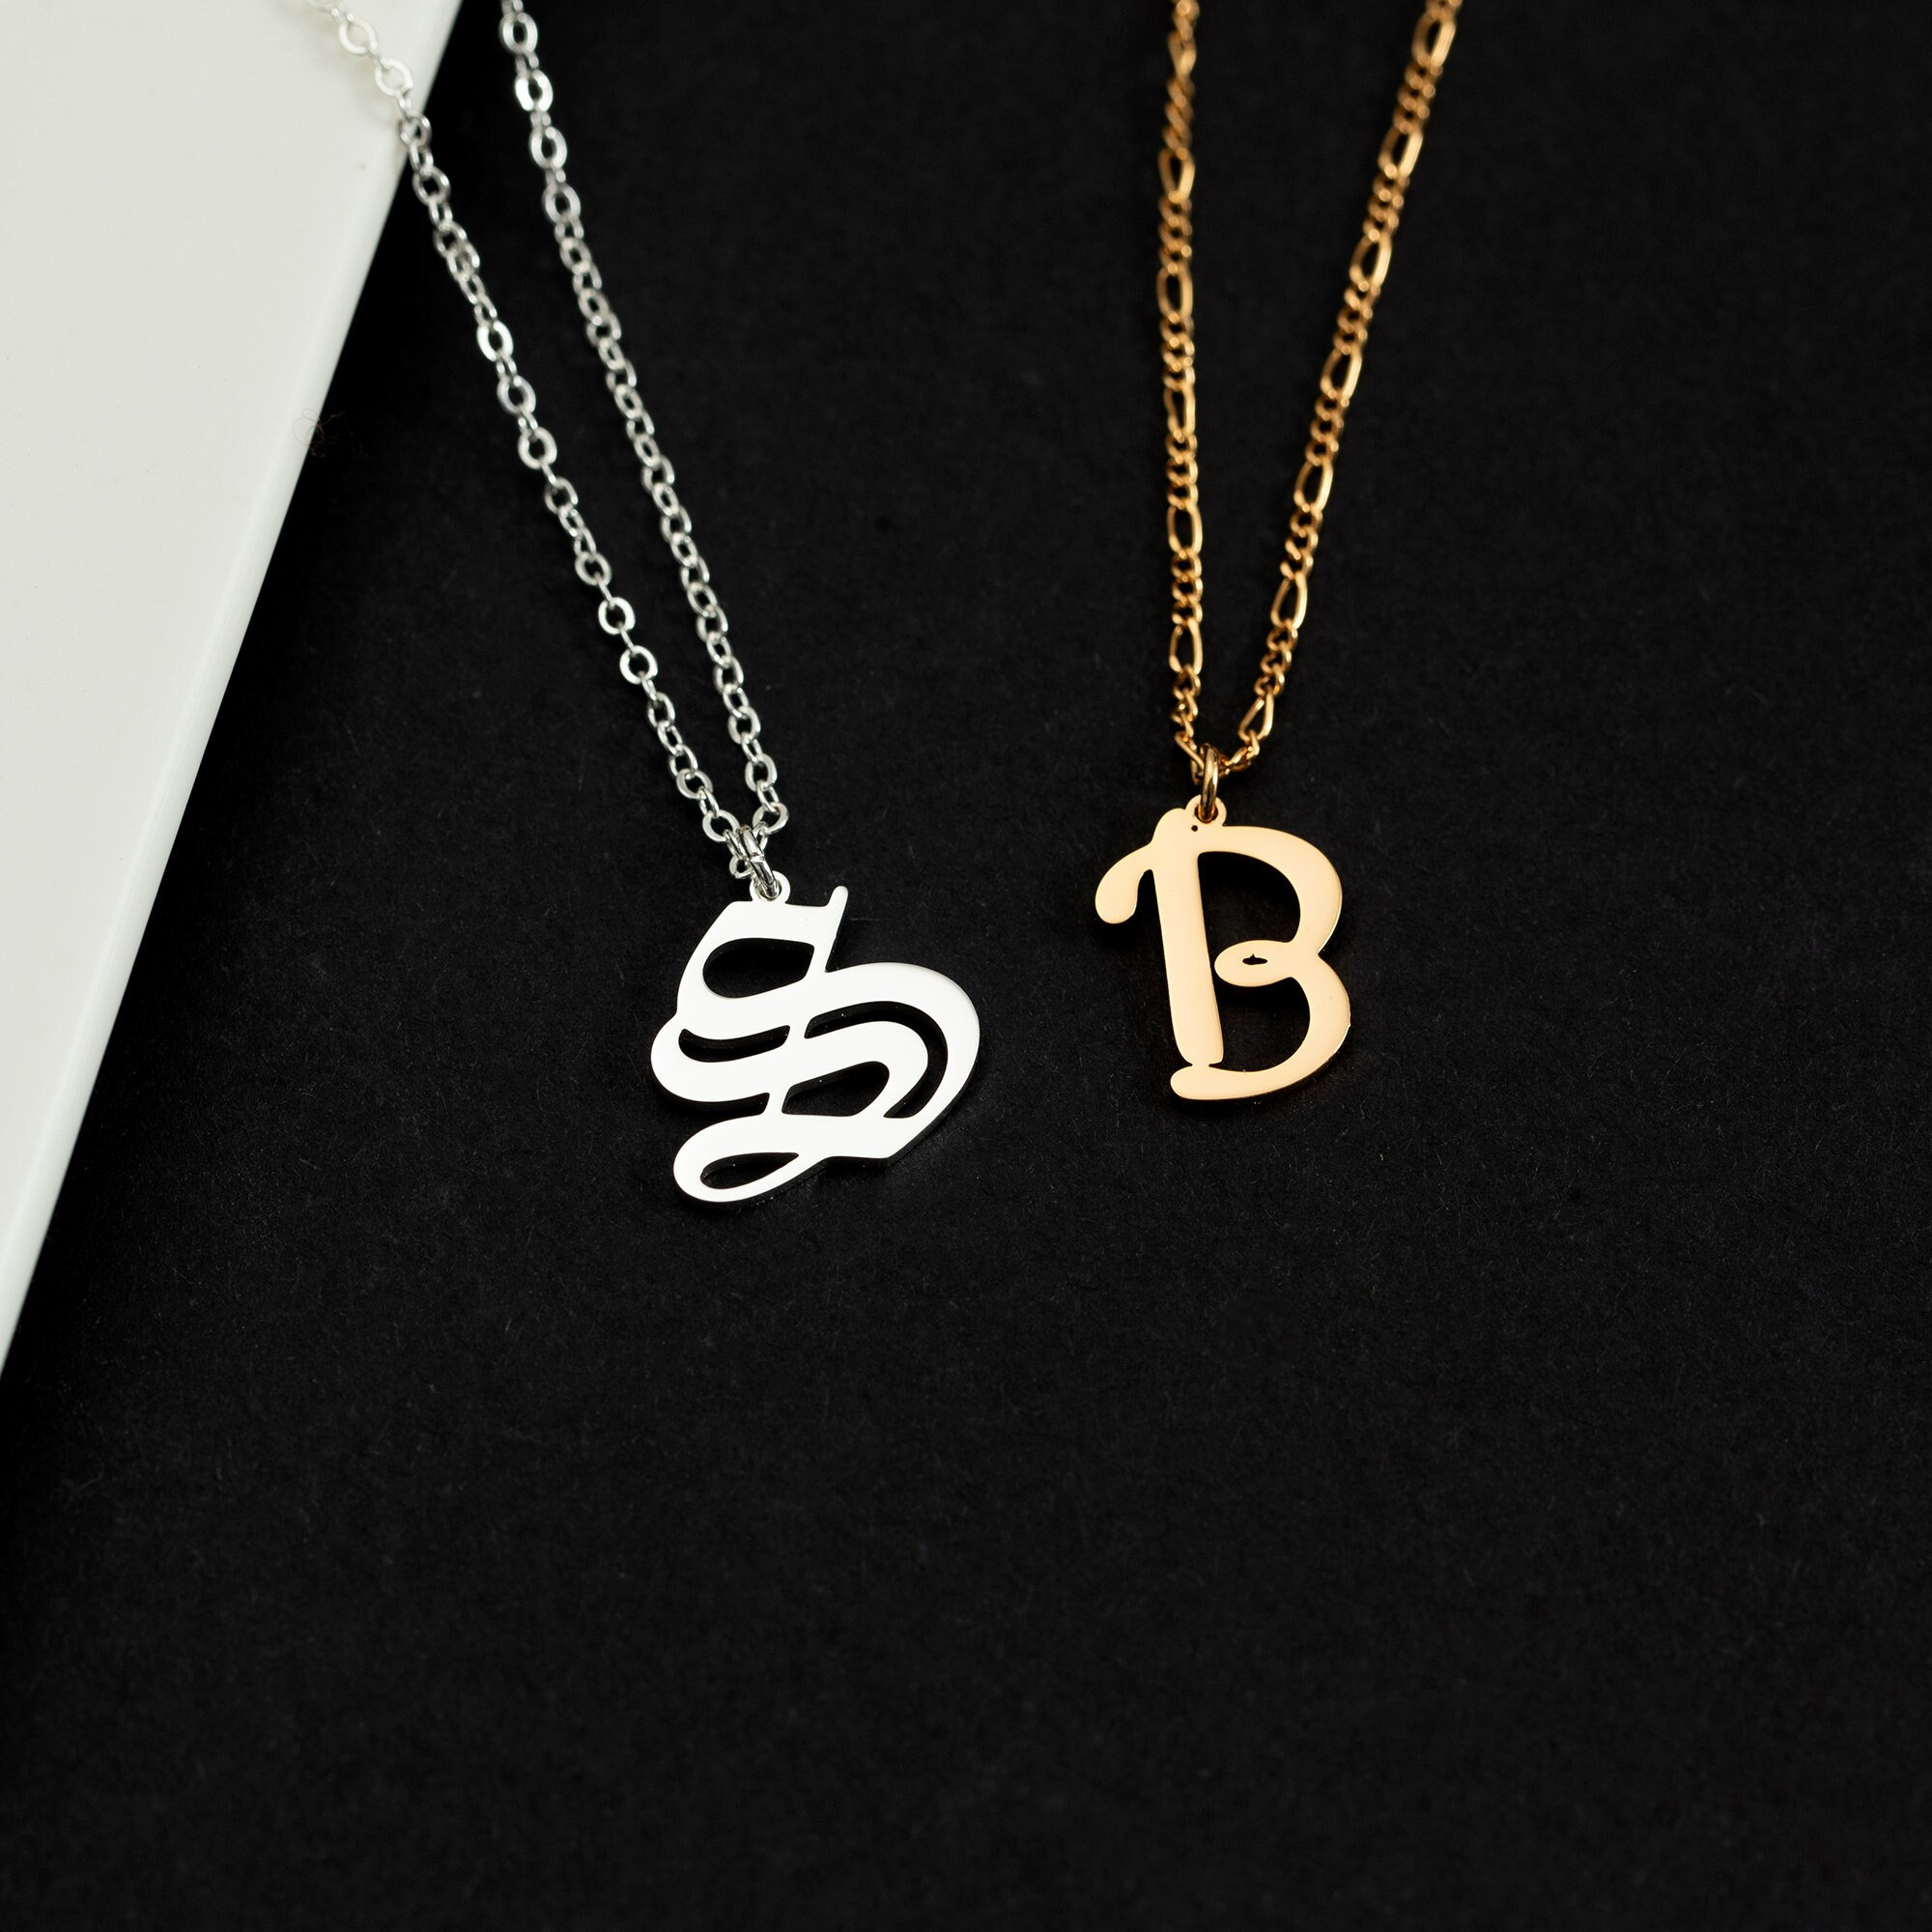 TINGN Dainty Letter Initial Necklaces for Women Girls Small Dice Pendant Simple  Cute Letter Necklaces 